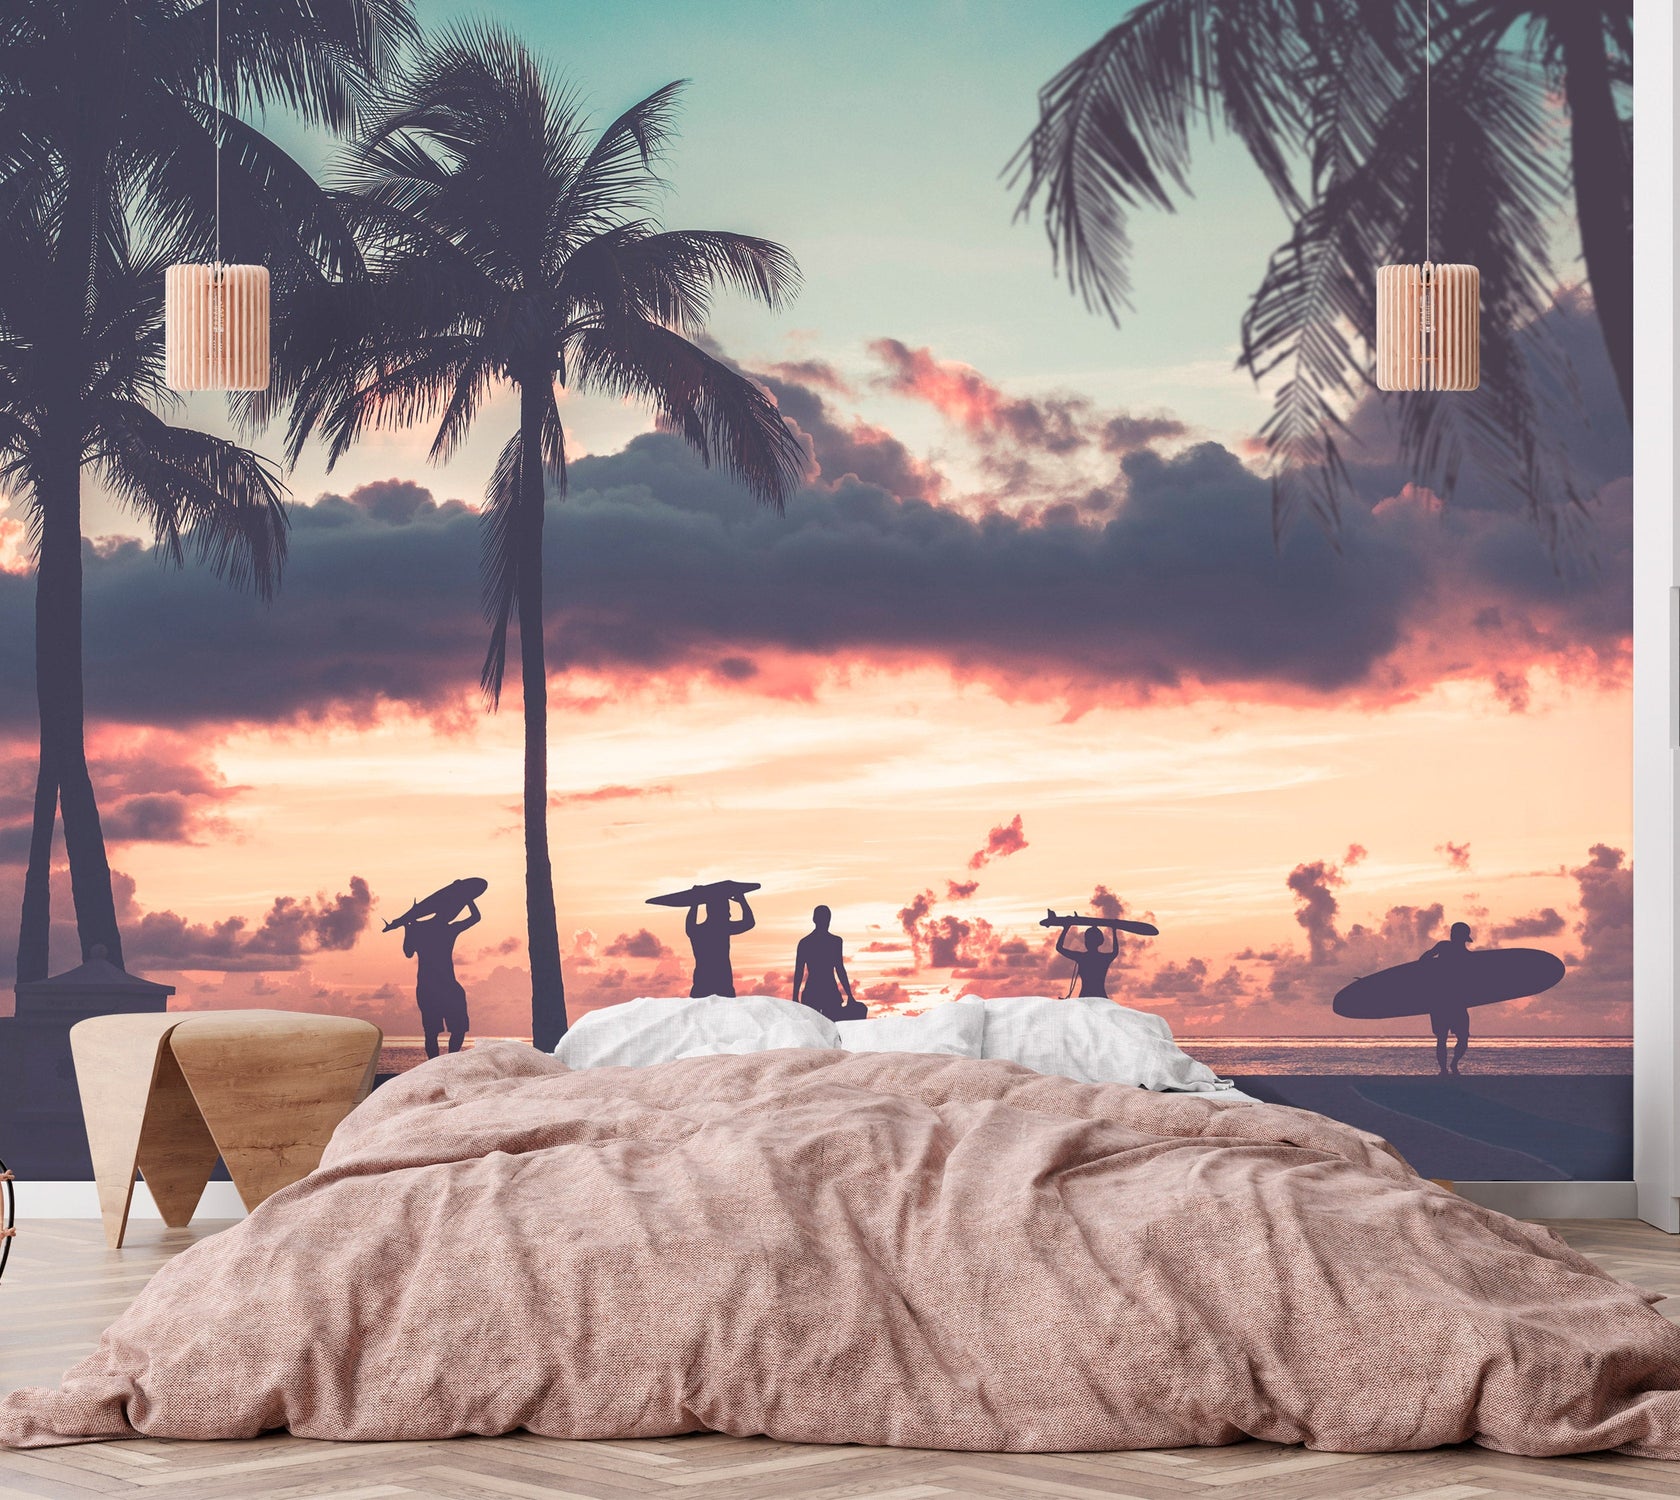 Peel & Stick Tropical Wall Mural - Surfing At Sunset - Removable Wall Decals-Tiptophomedecor